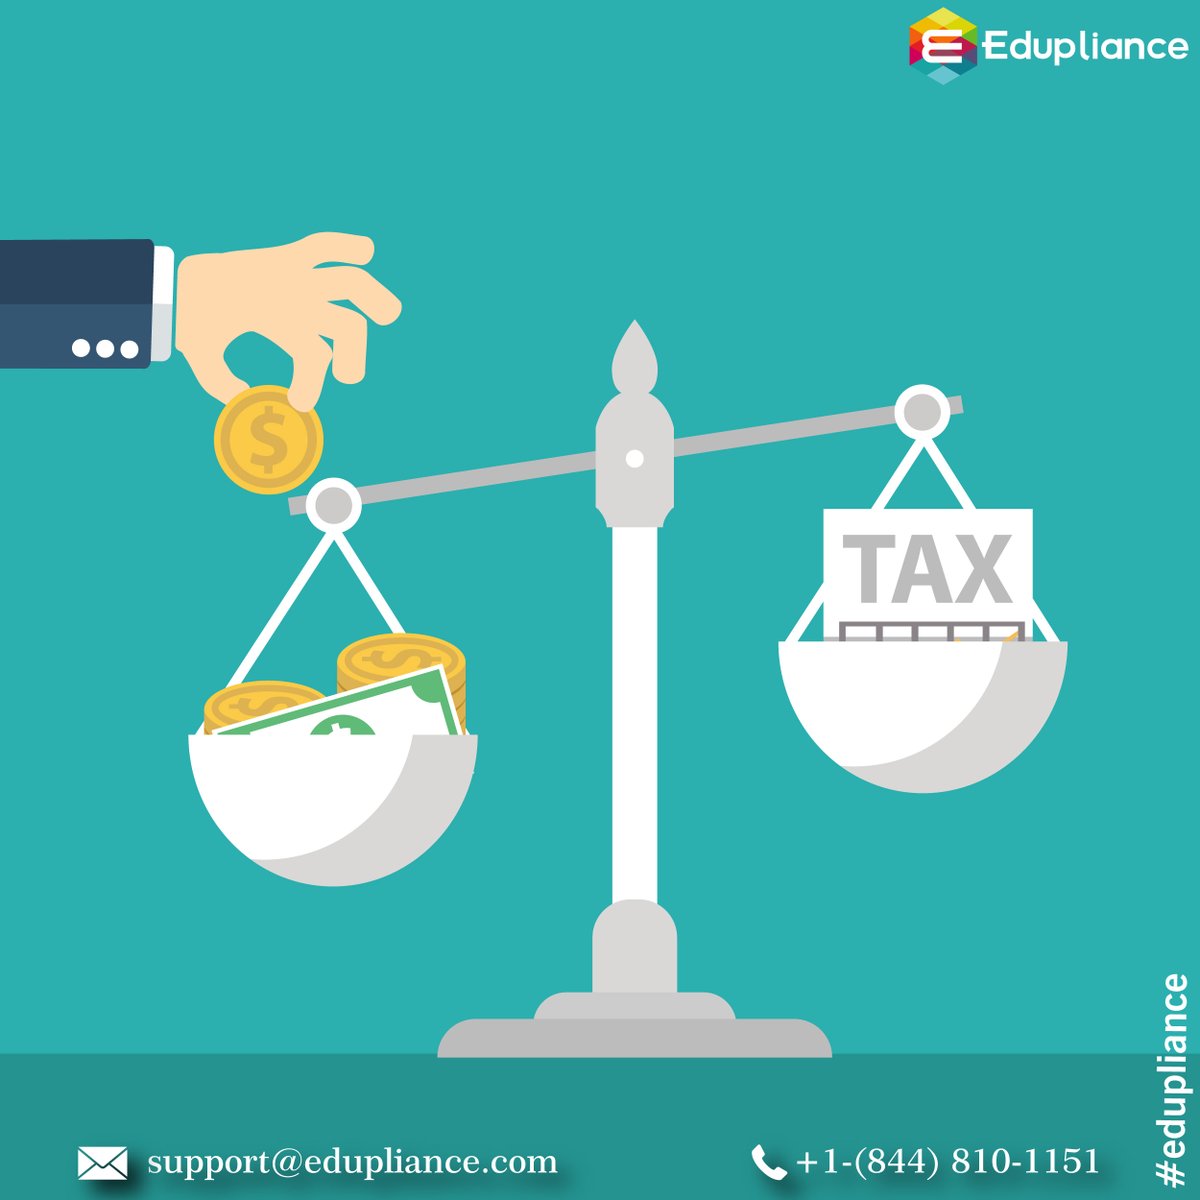 Tax - Equity Market Eagerly Waiting Carbon Sequestration Guidance, for more information - edupliance.com

#EnvironmentalOrganizations #InternalRevenueCode #MarketEagerly #Section45Q #Tax #TaxEquity #UNEP #UnitedNationsEnvironmentProgramme #Edupliance #Elearning #webinar